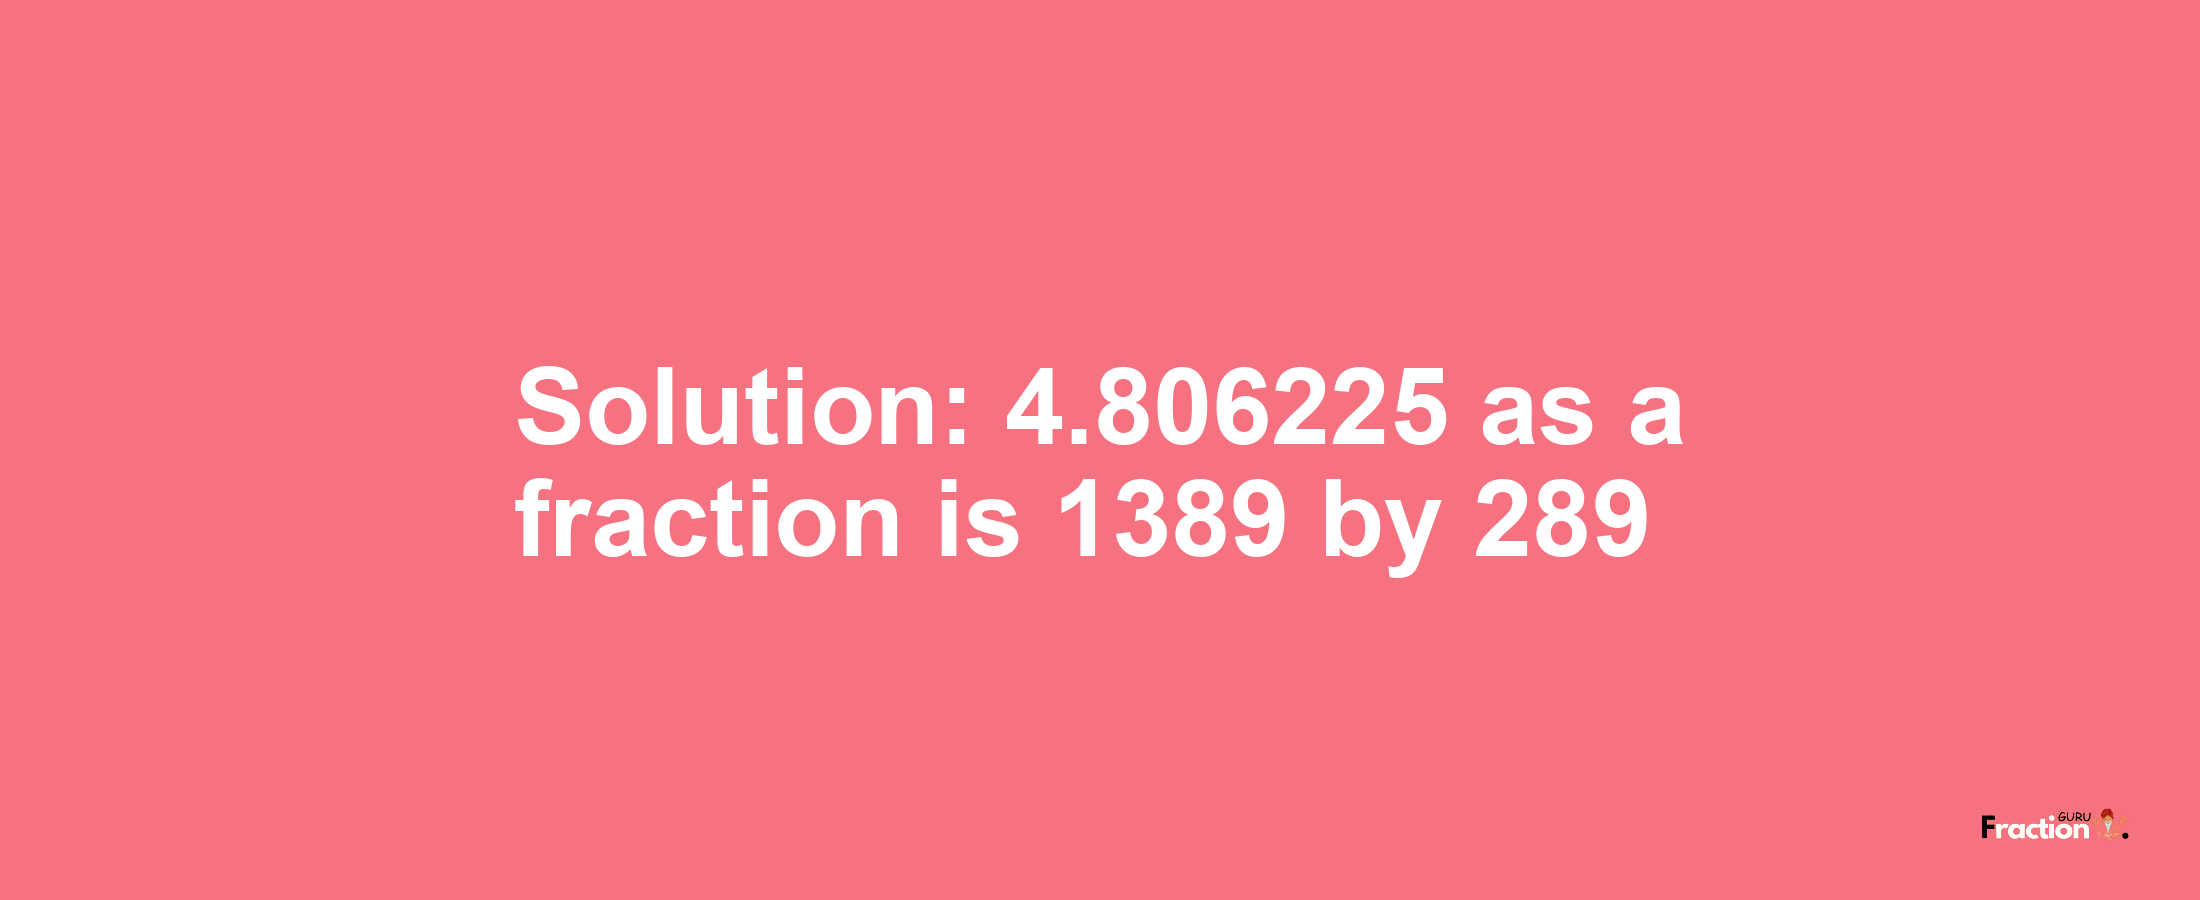 Solution:4.806225 as a fraction is 1389/289